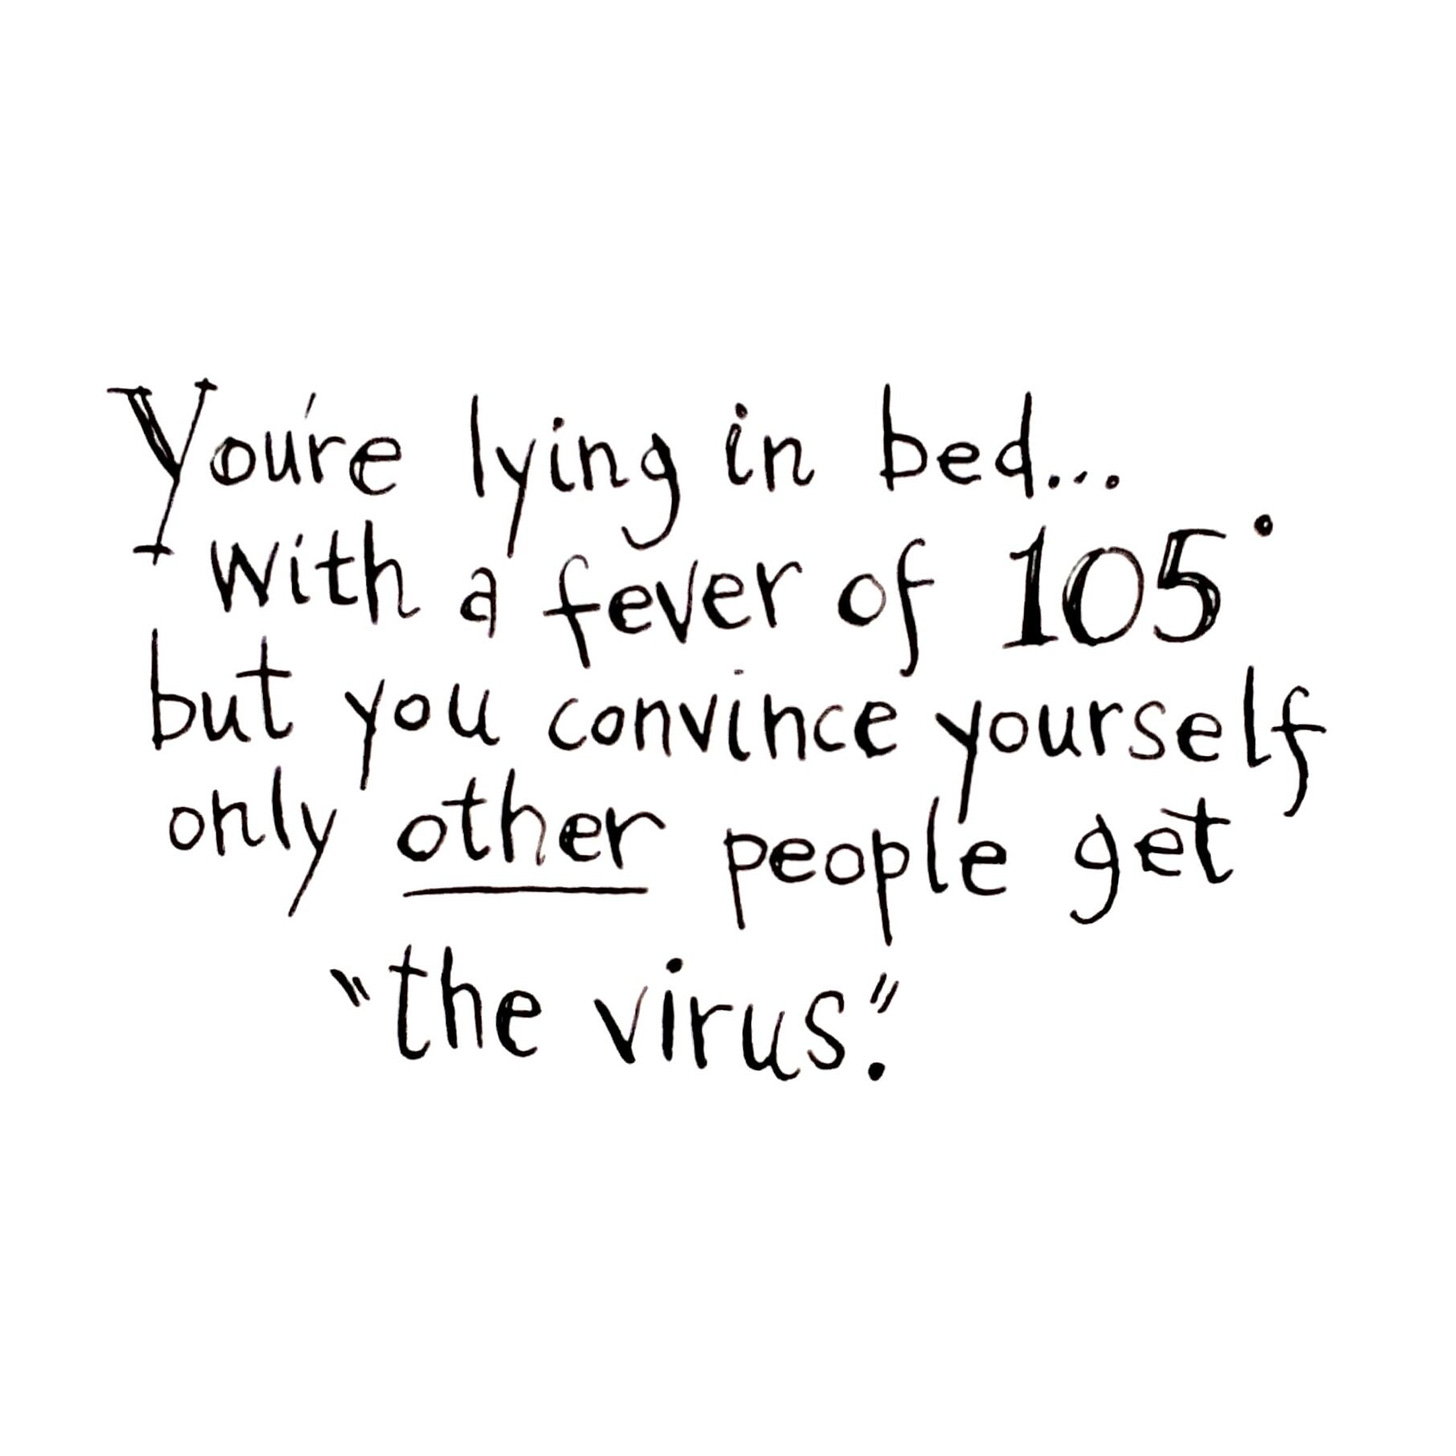 You're Lying in Bed... with a fever of 105 but you convince yourself only 'other' people get "the virus".